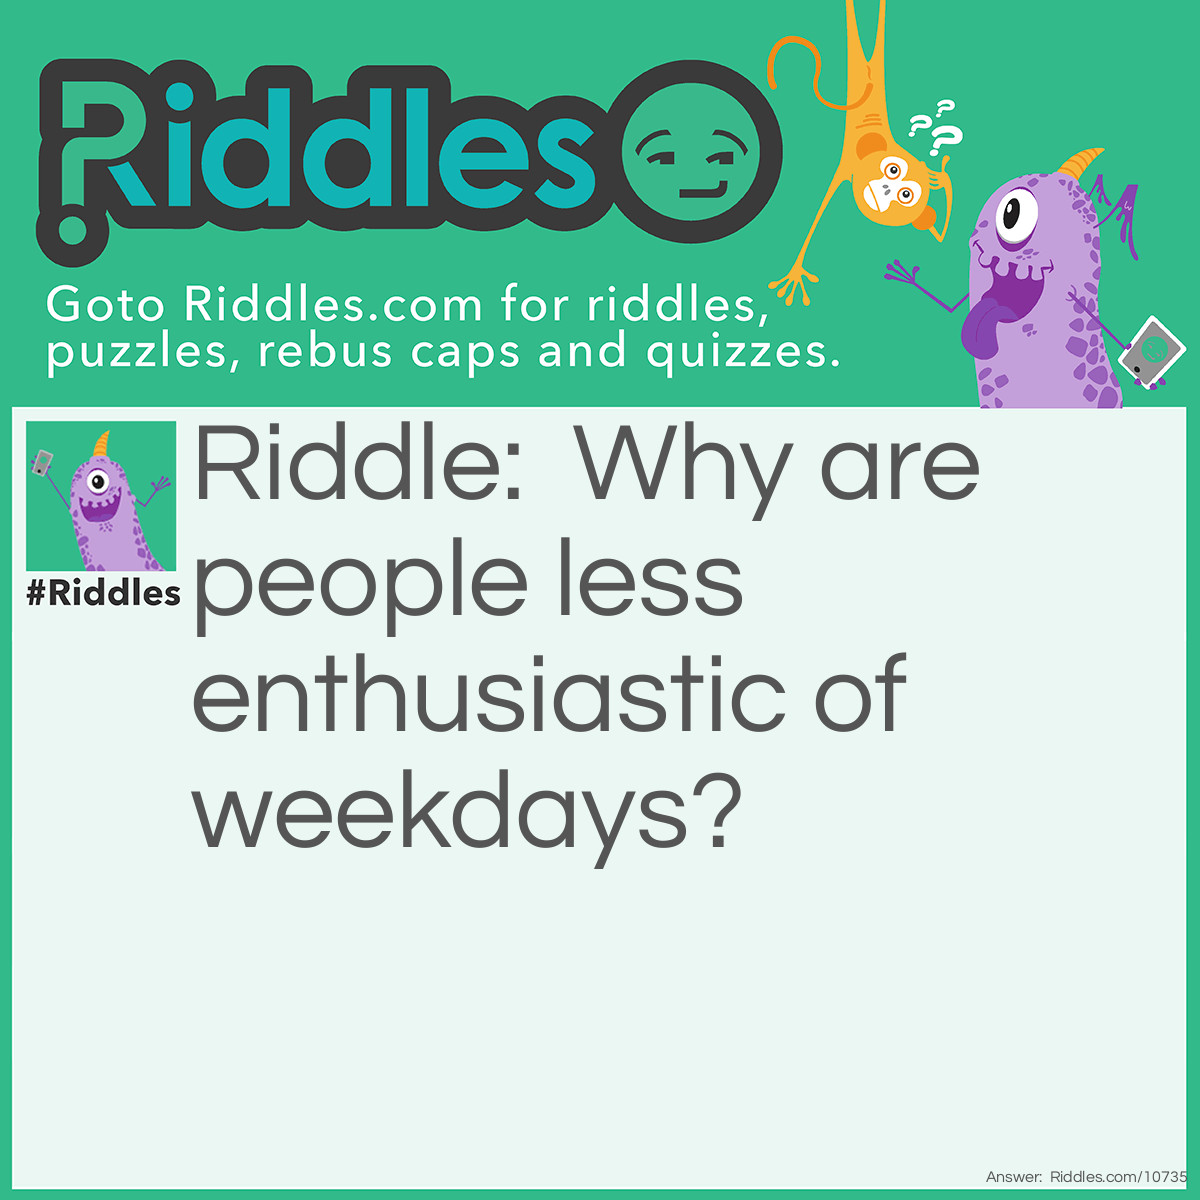 Riddle: Why are people less enthusiastic of weekdays? Answer: Because it is the WEAK-DAYS.